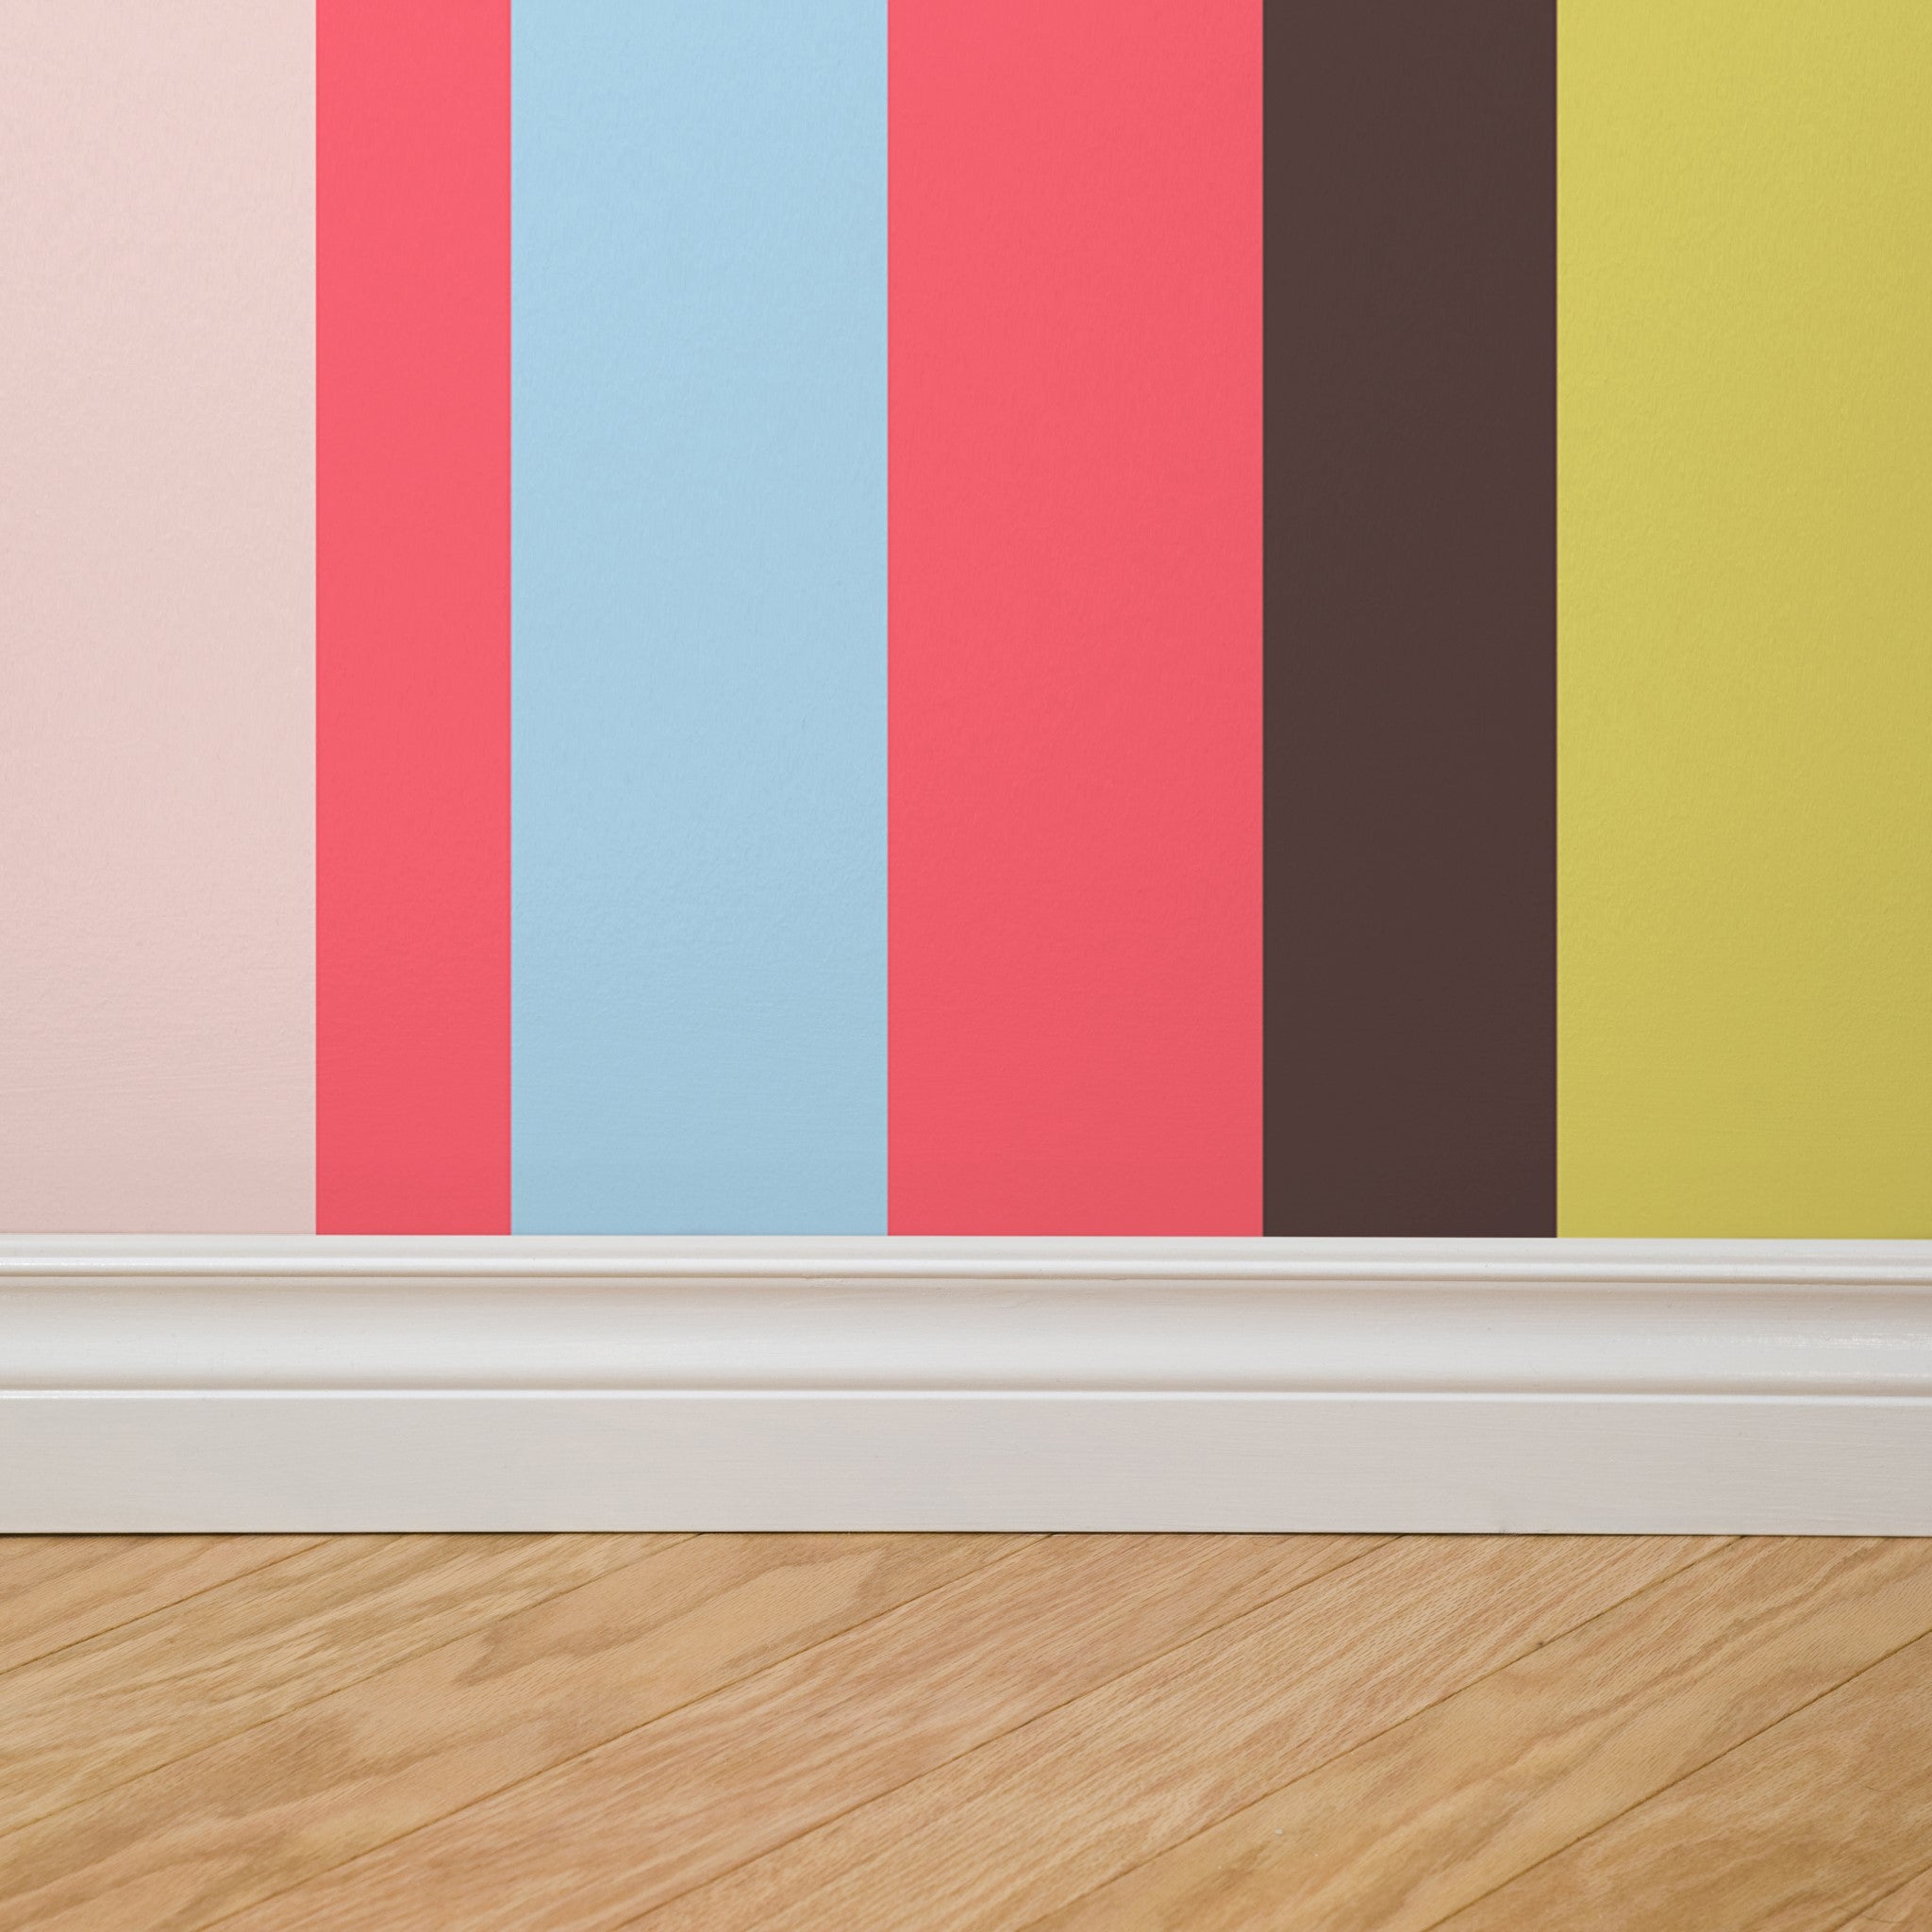 "Wall Blush So Fetch Wallpaper in a modern room with colorful striped pattern focused on wall decor."